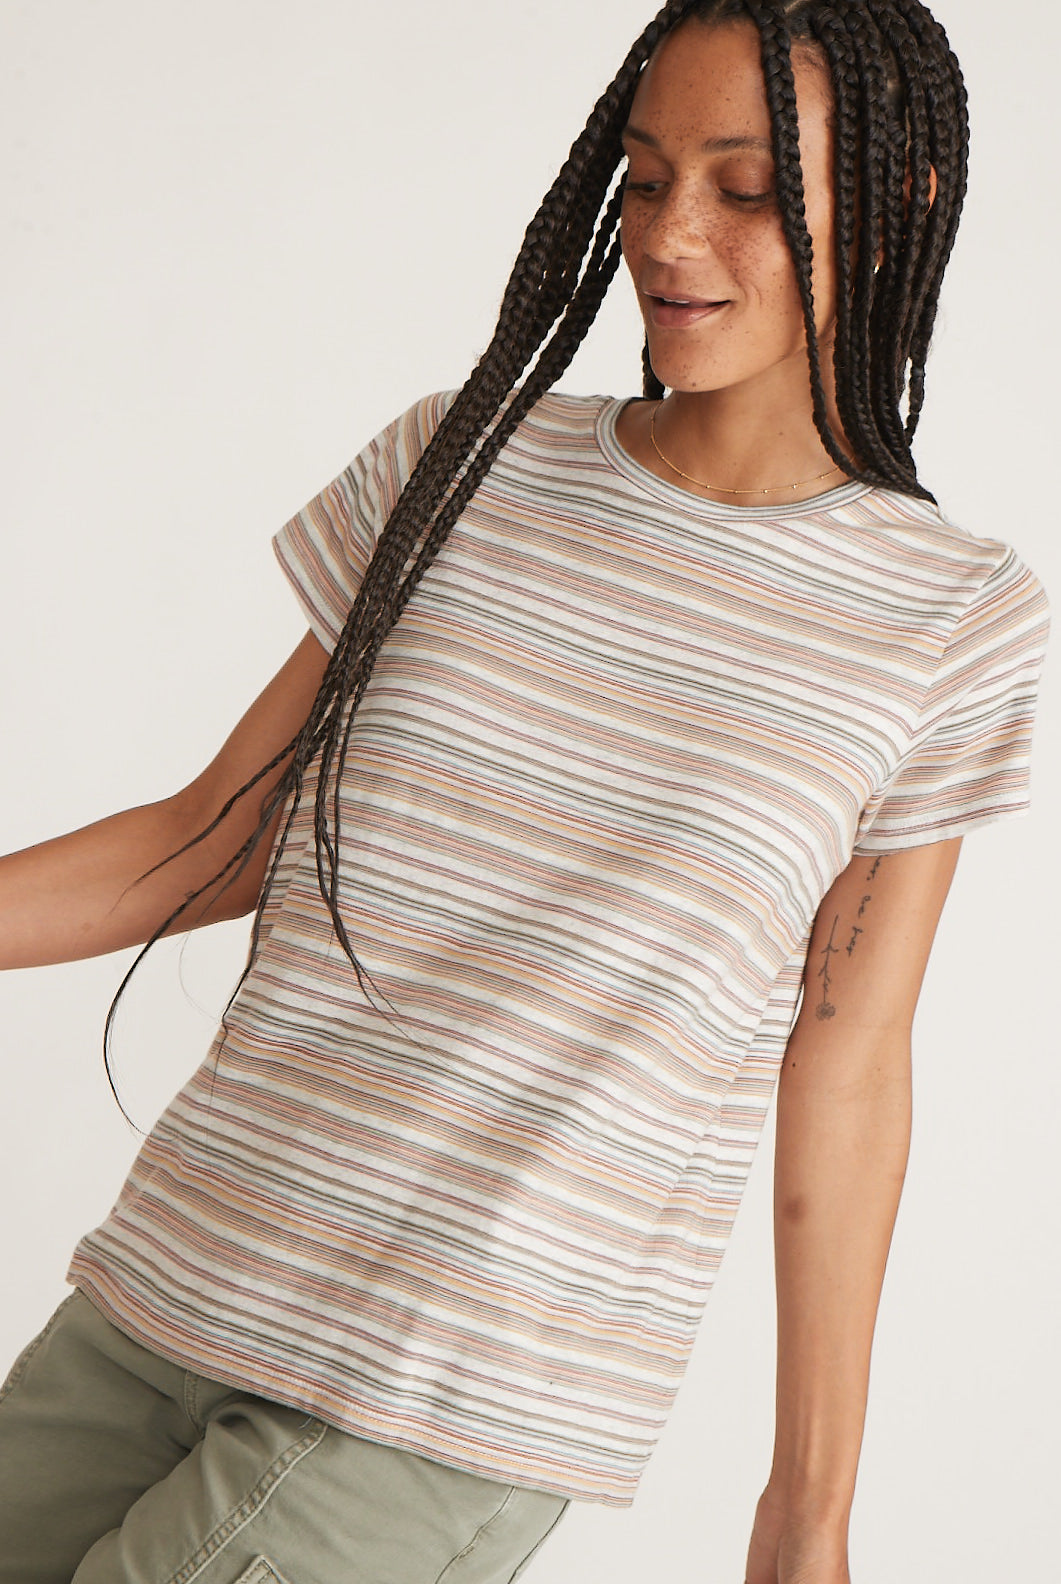 Multi Colored Striped Top Apex Ethical Boutique